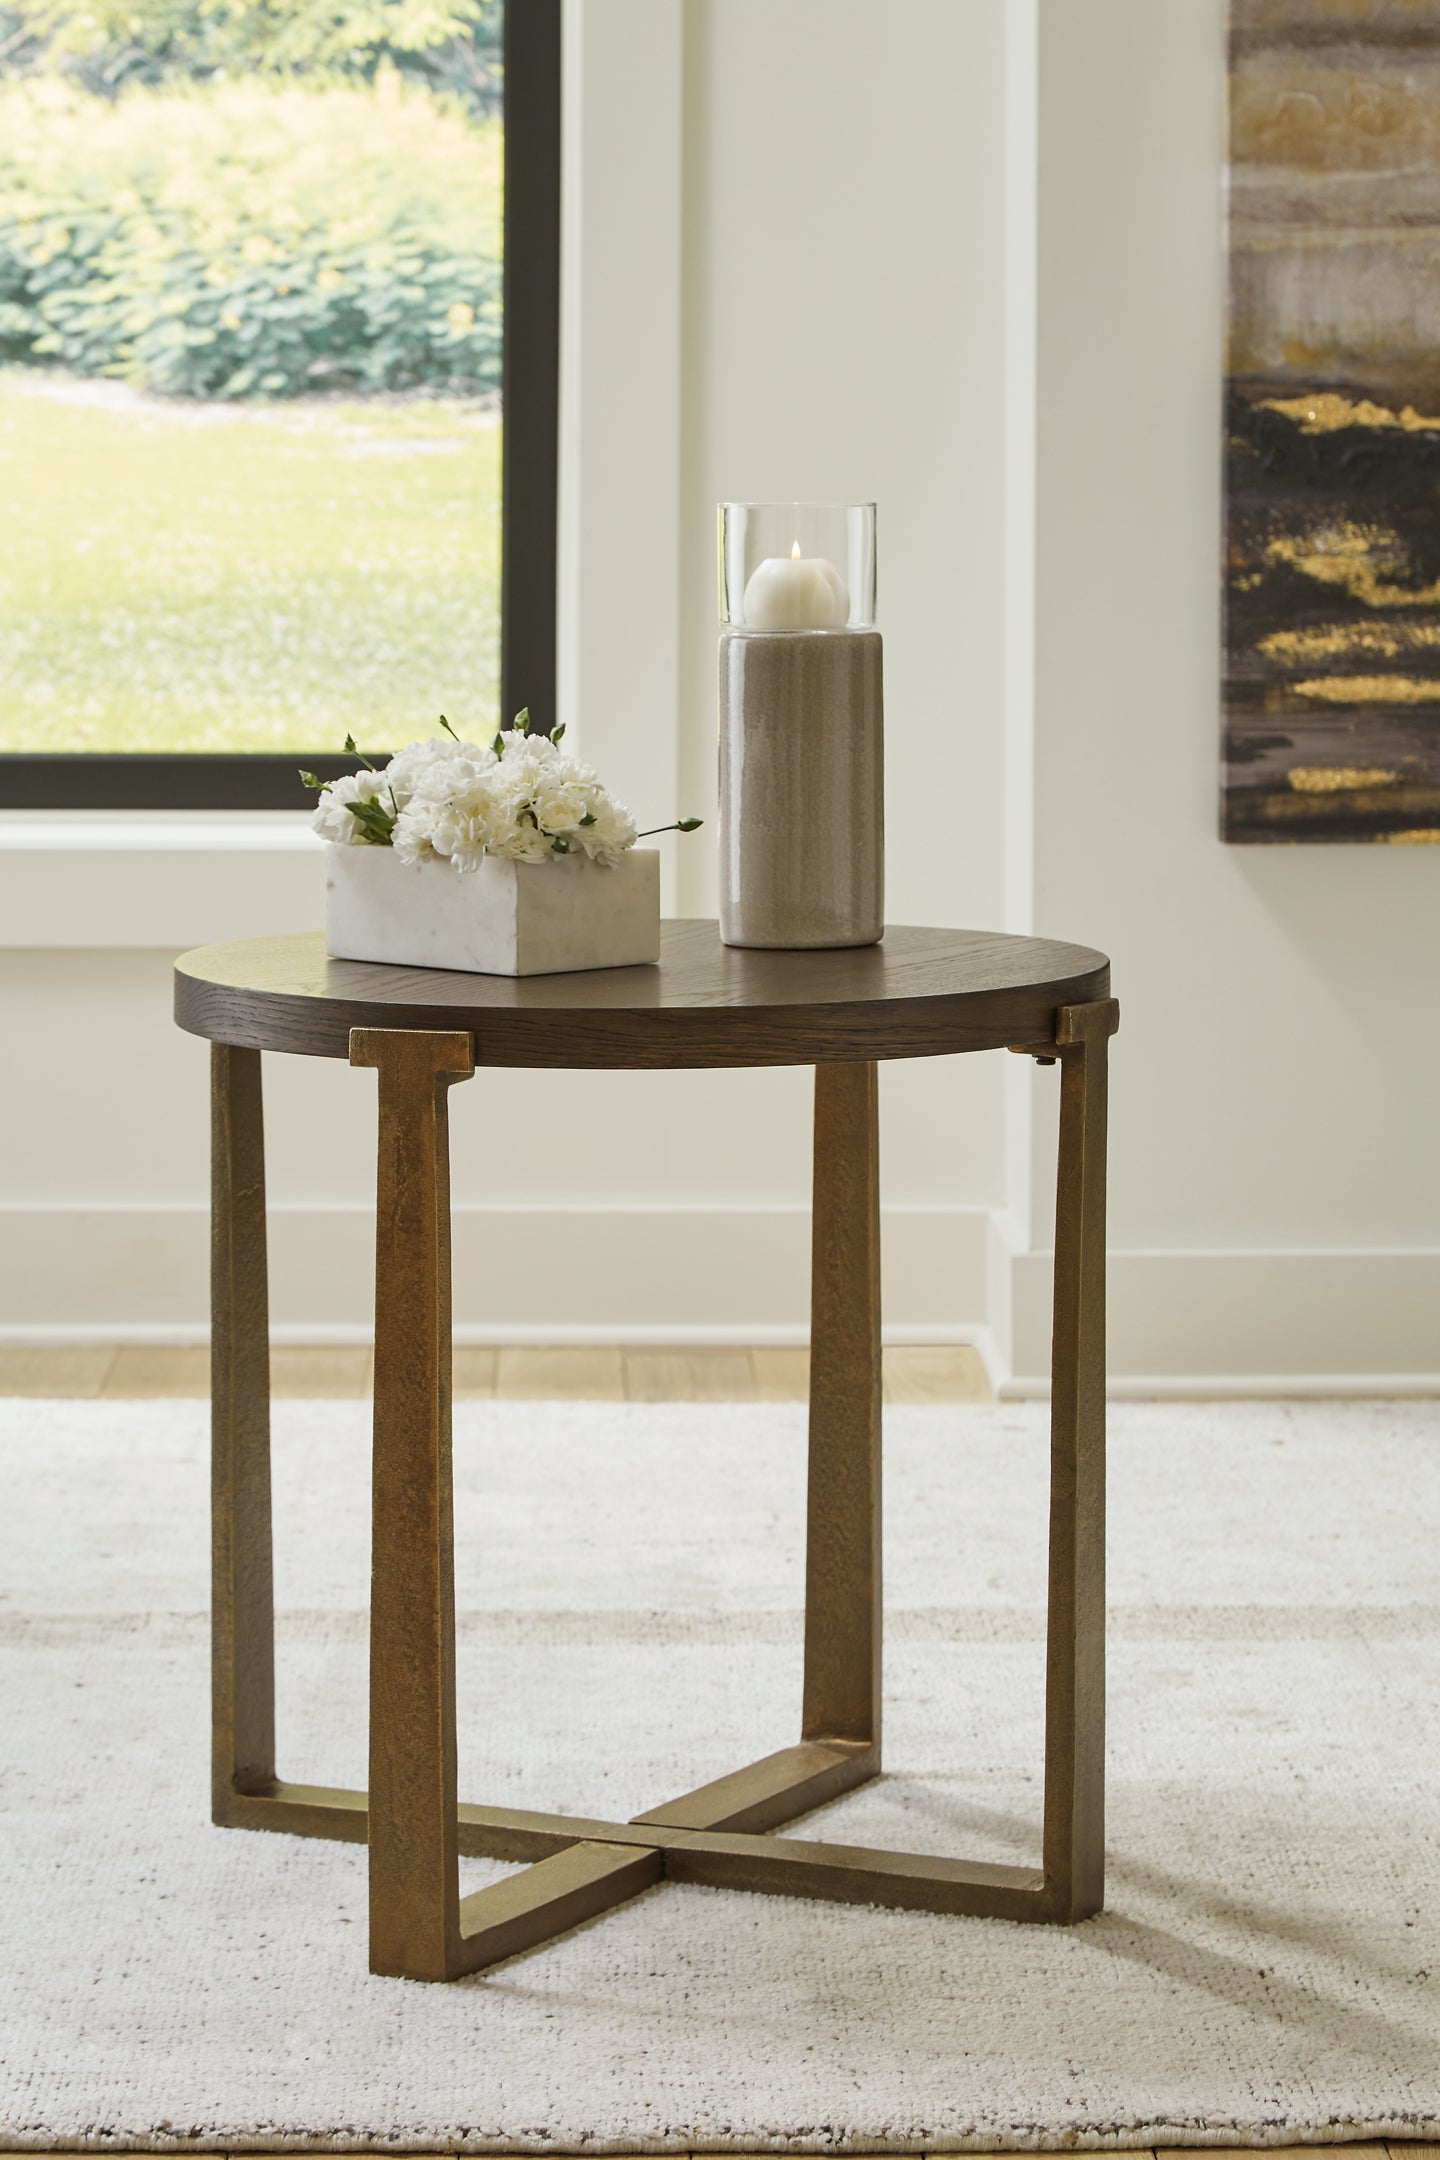 Balintmore Coffee Table with 2 End Tables Signature Design by Ashley®